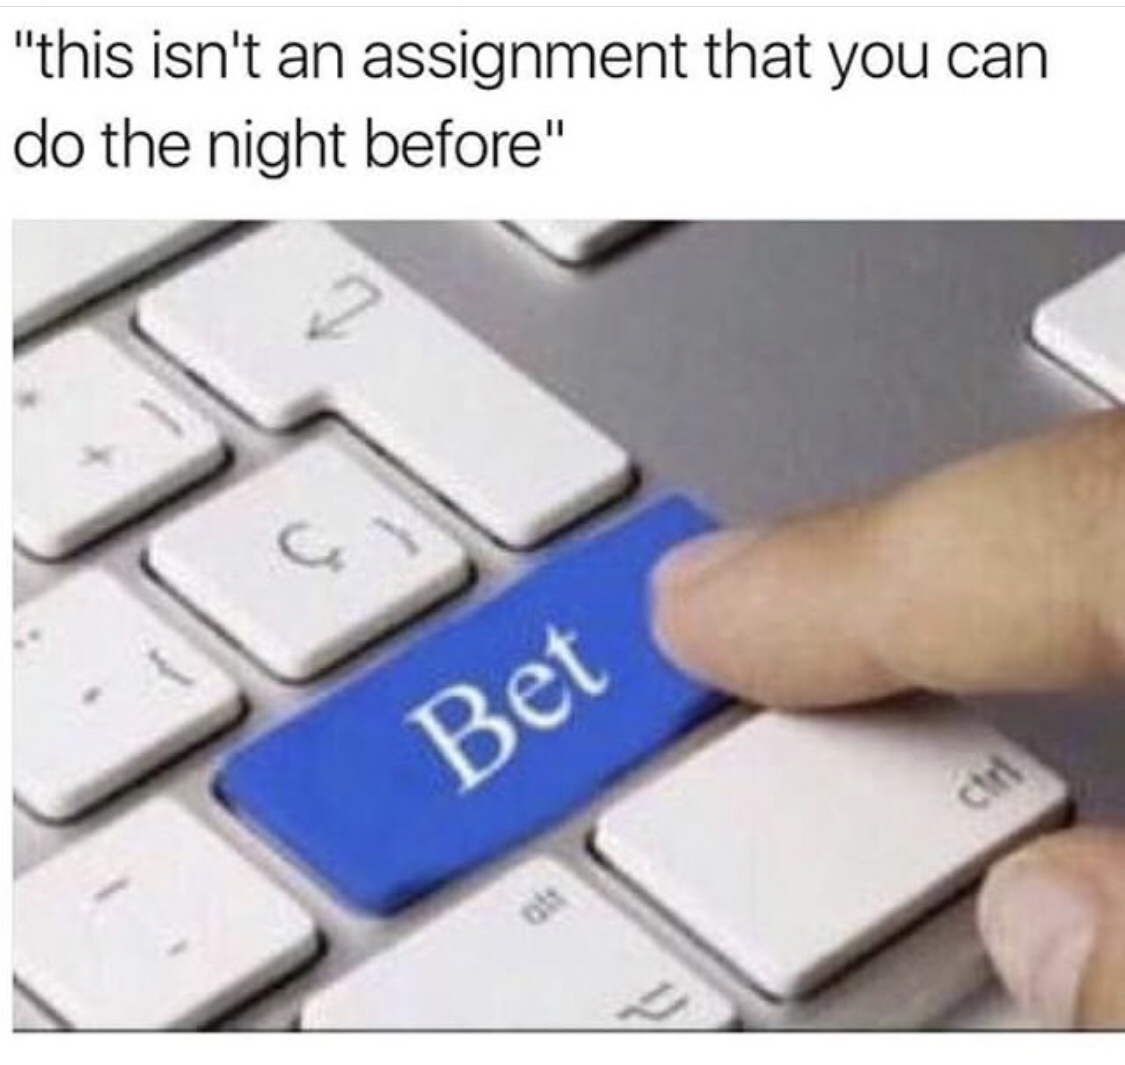 bet button meme - "this isn't an assignment that you can do the night before" Bet